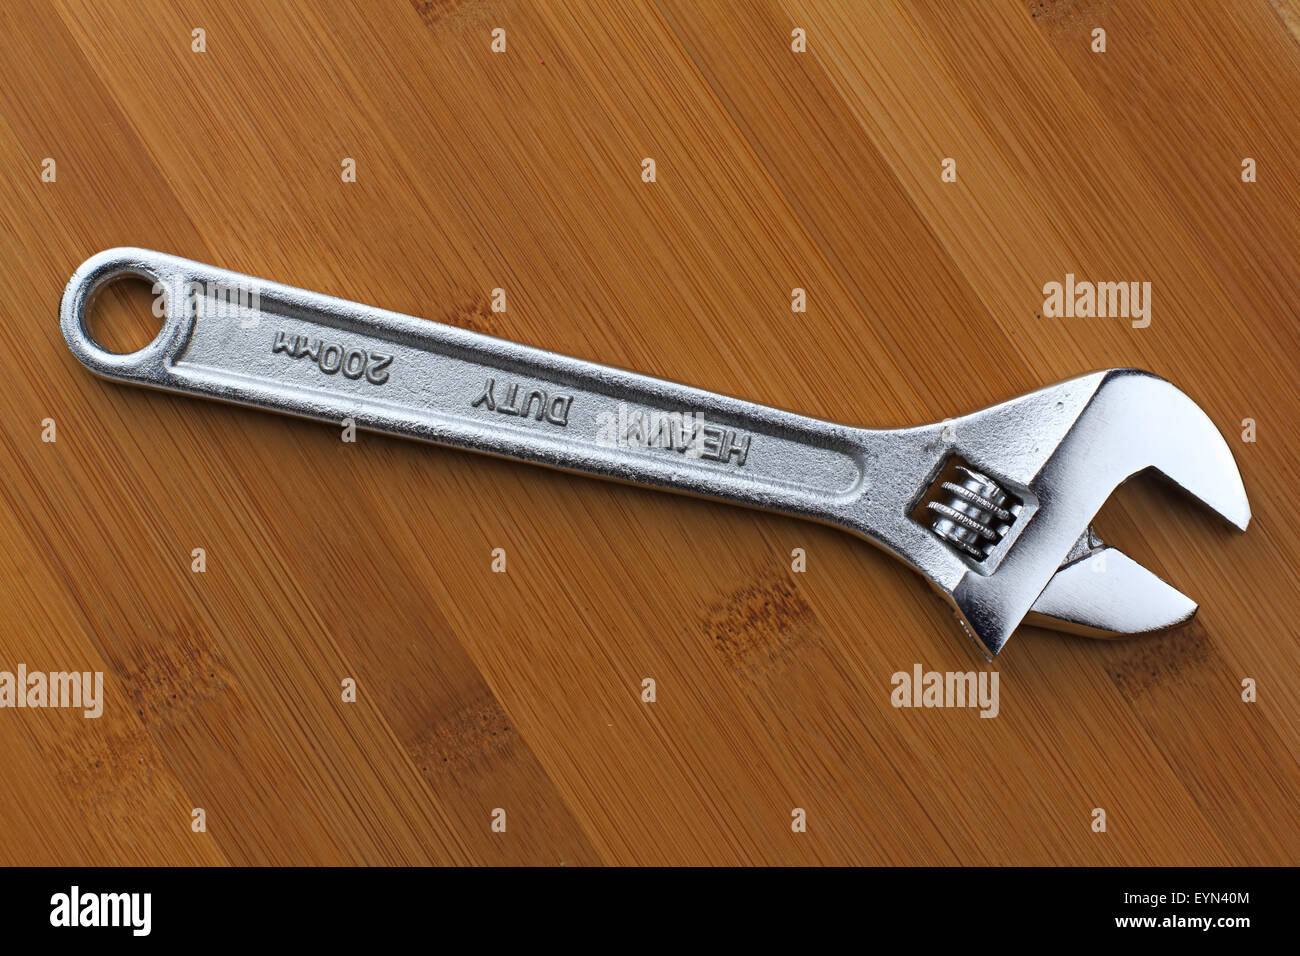 shiny Adjustable wrench on a wooden table Stock Photo